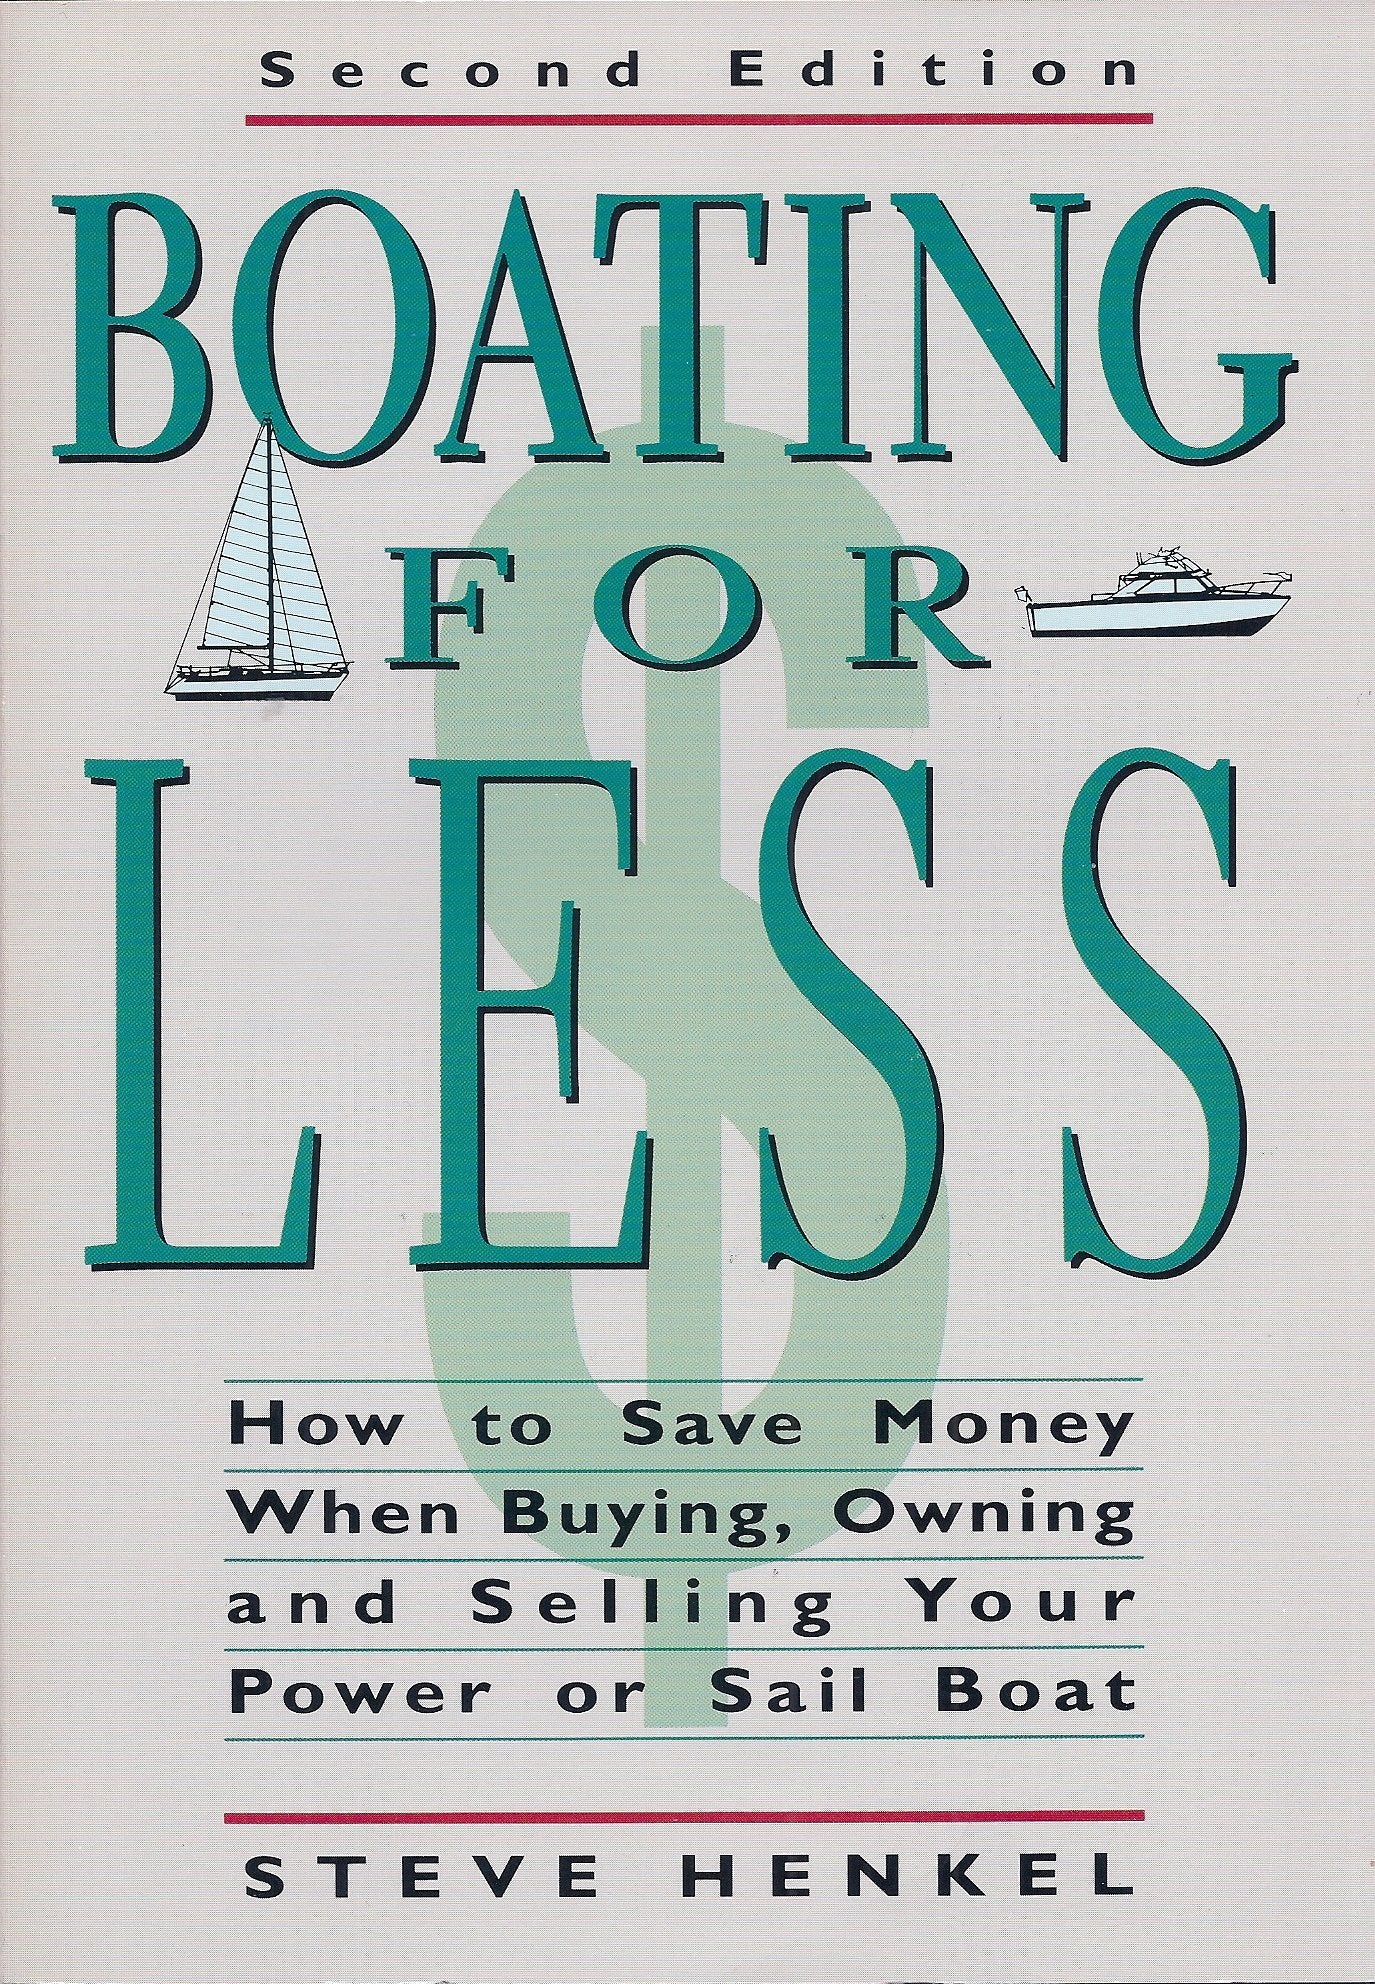 Boating for Less: A Comprehensive Guide to Buying, Owning, and Selling Your Power or Sail Boat